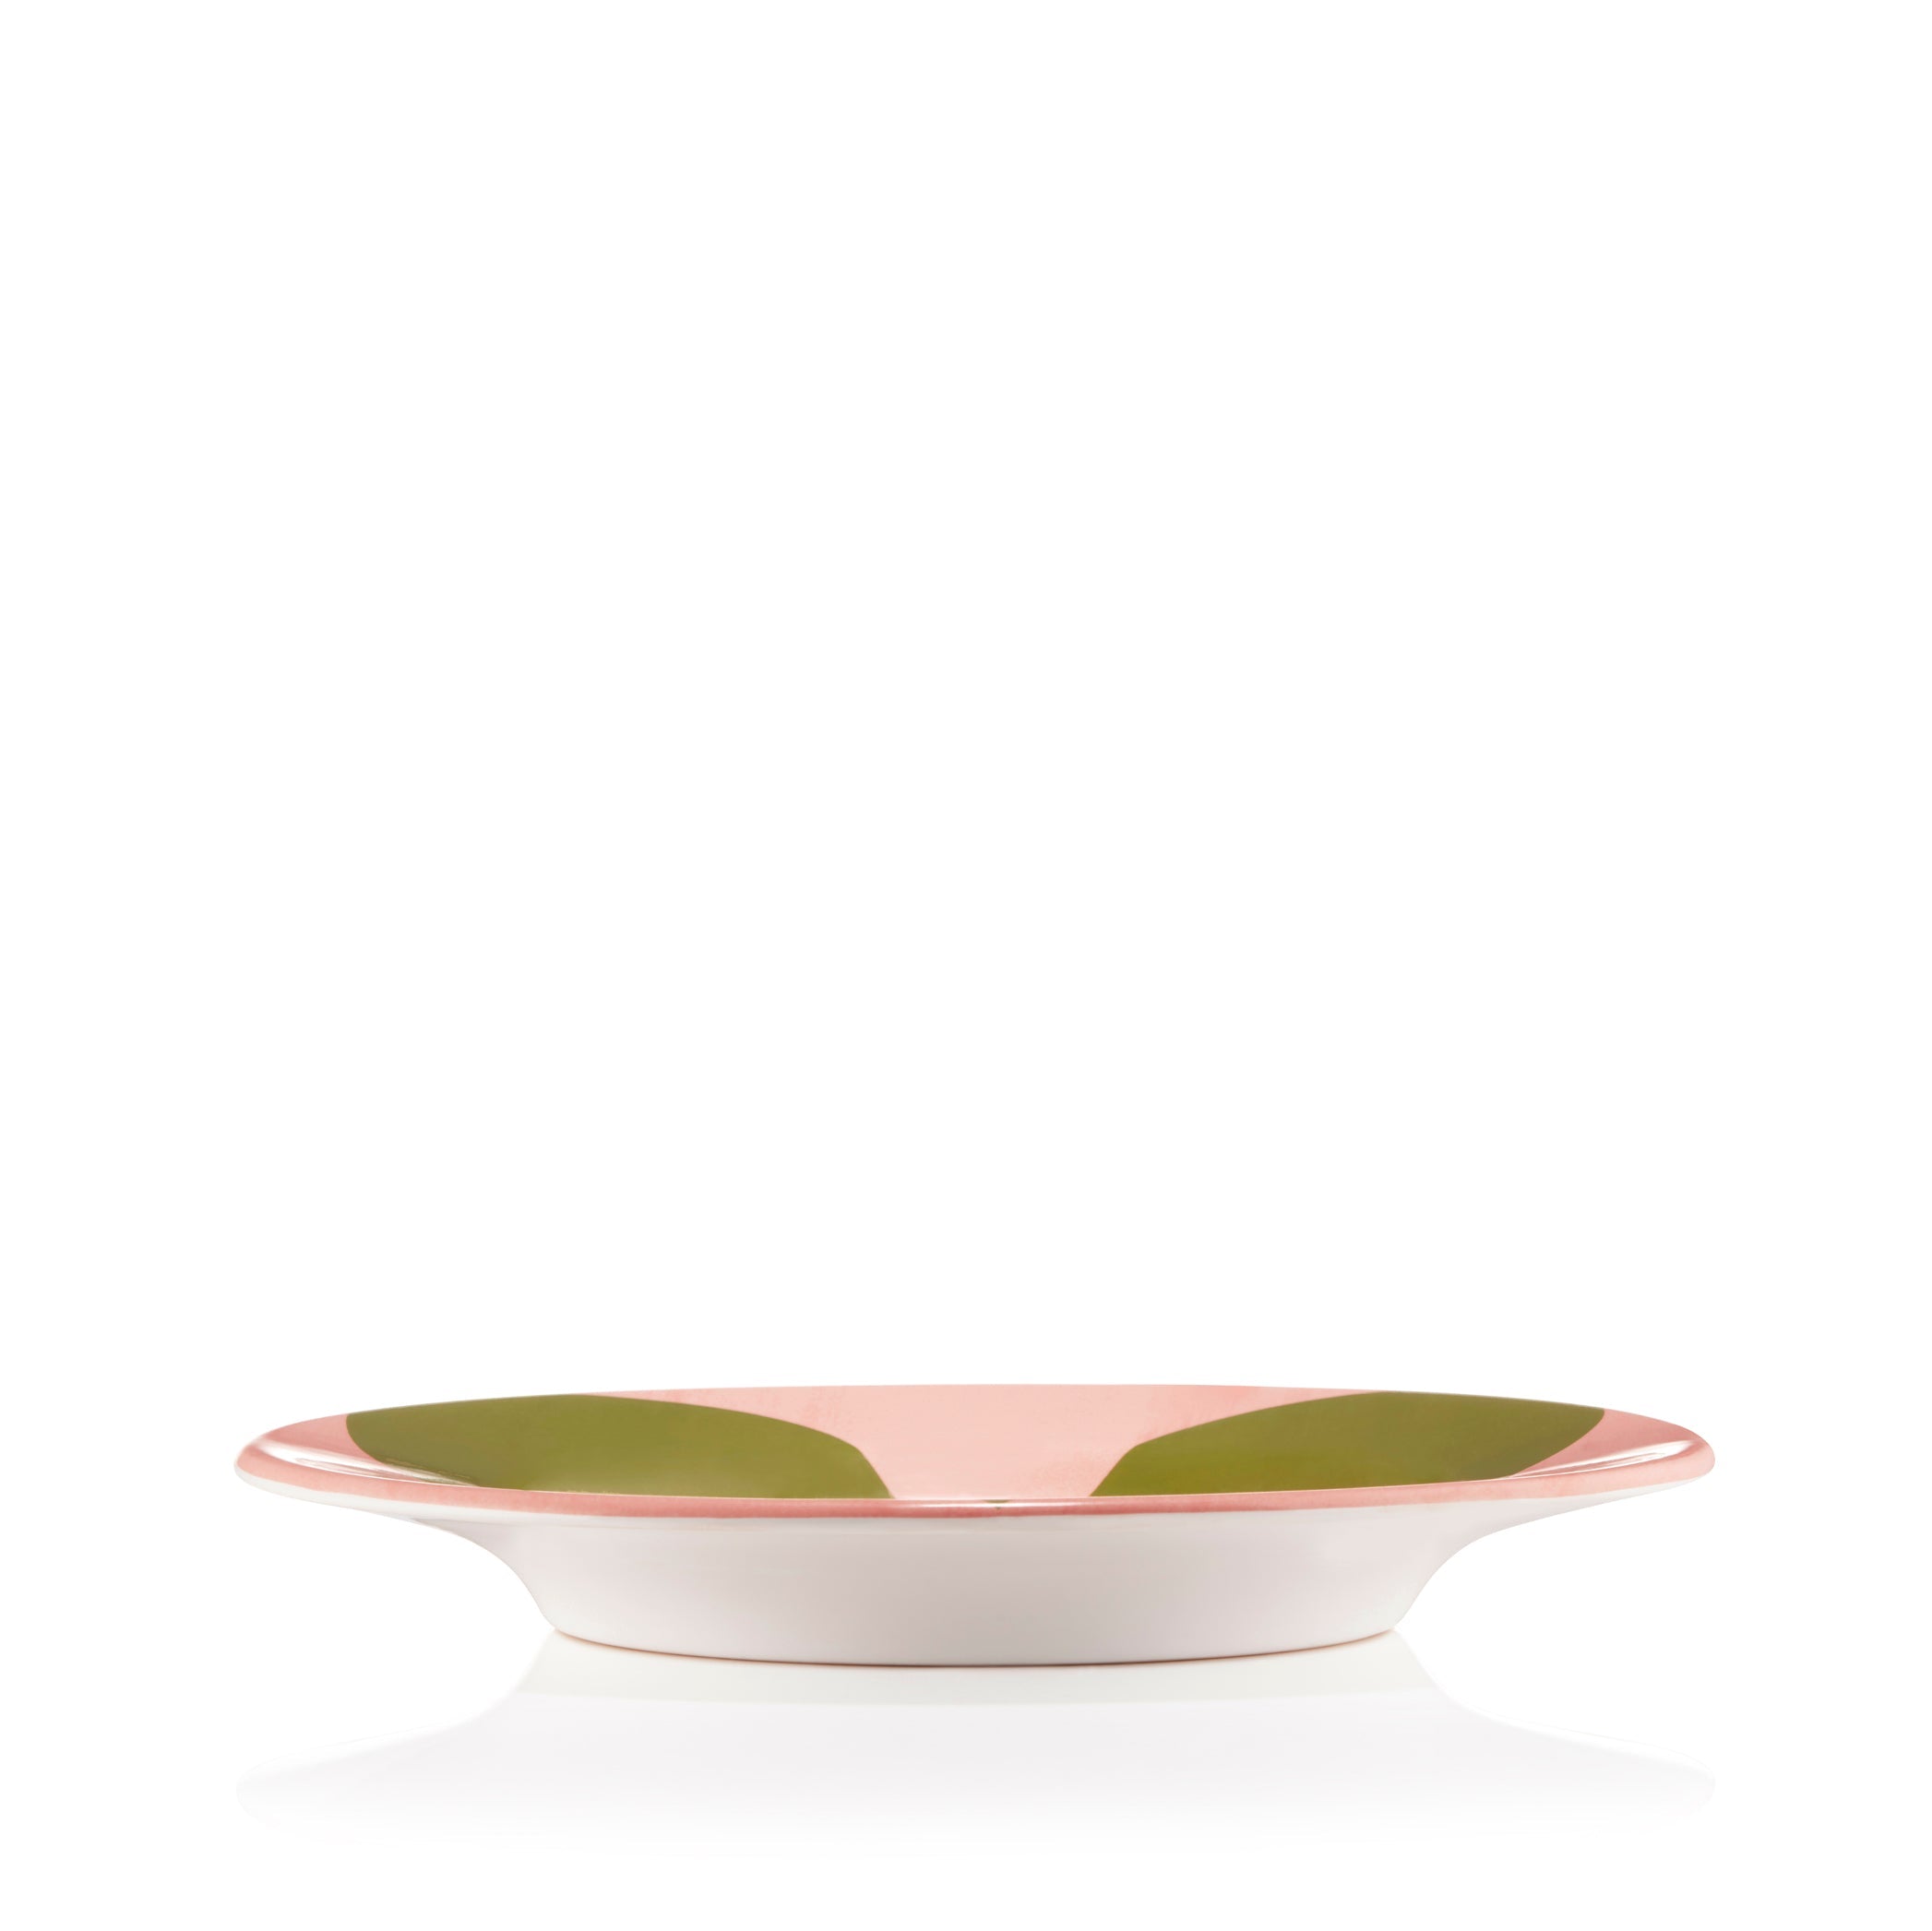 S&B Heart Side Plate in Rose Pink and Avocado Green, 22cm